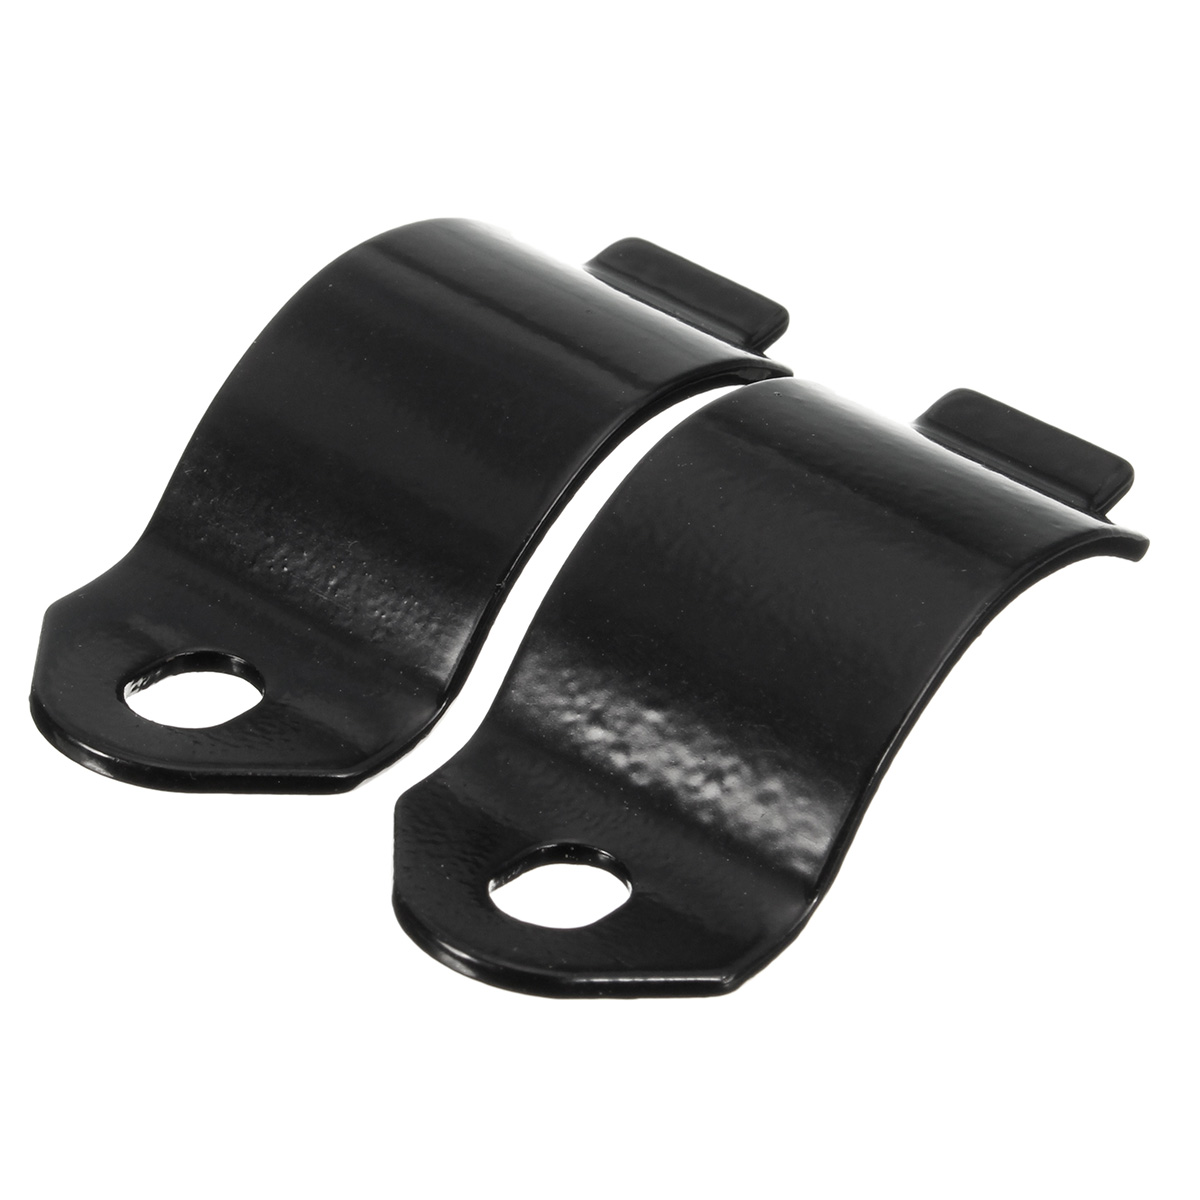 A Pair Motorcycle Turn Signal Indicator Light Mounting Brackets for Harley